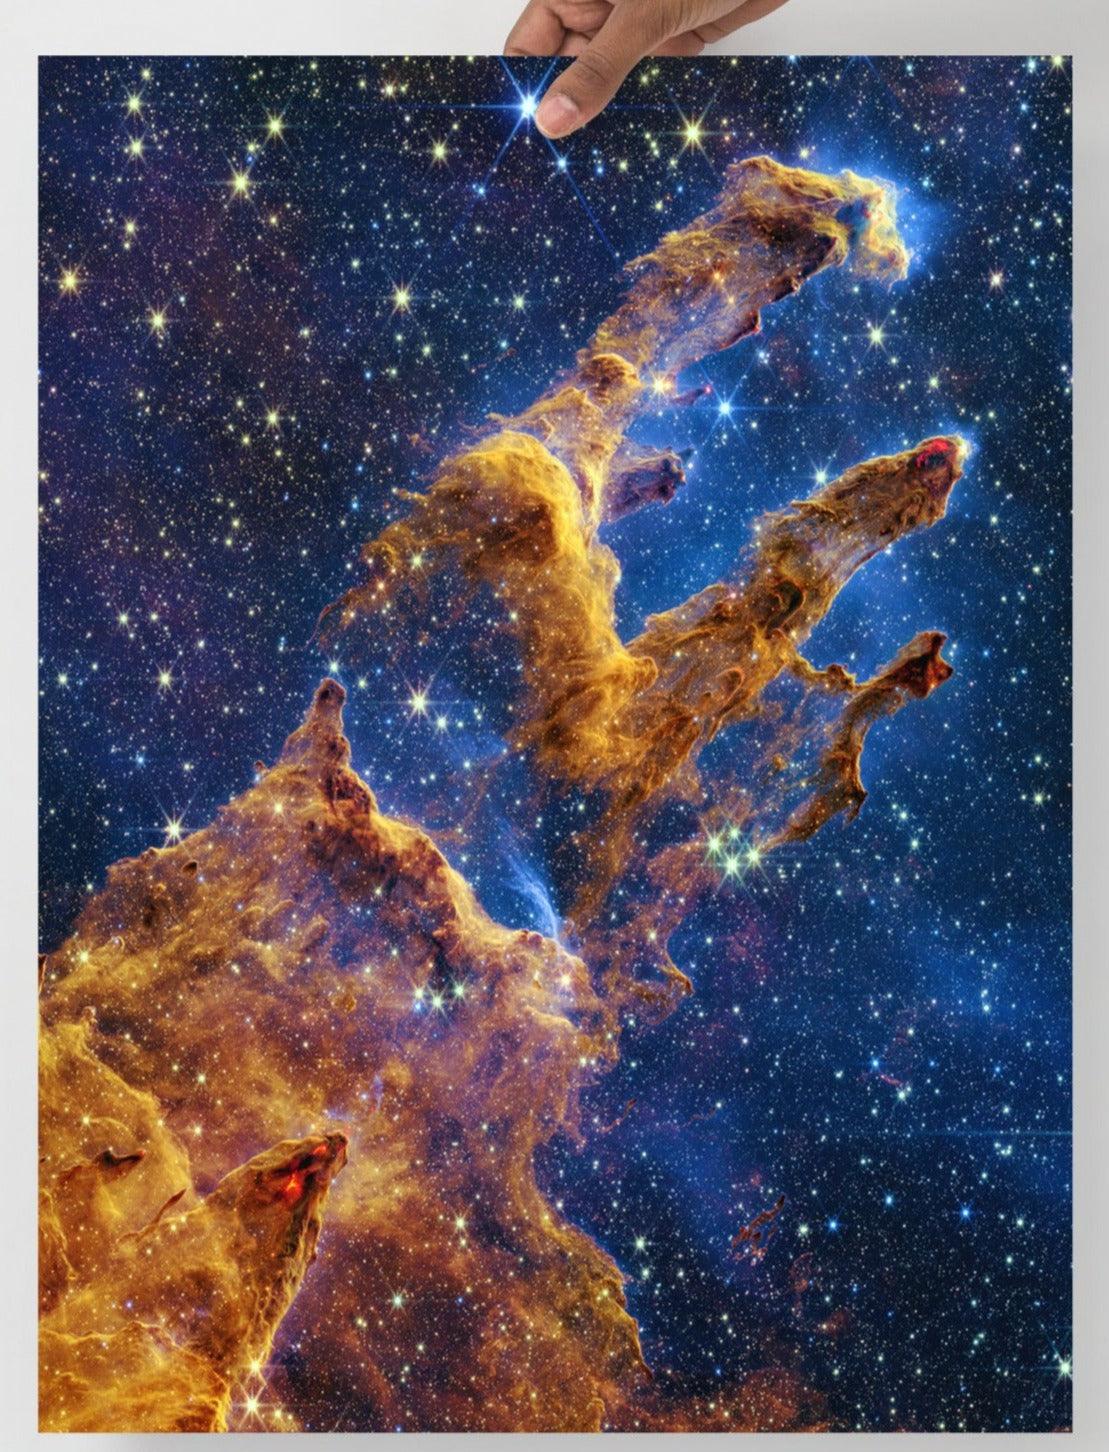 A Pillars of Creation by James Webb Telescope poster on a plain backdrop in size 18x24”.